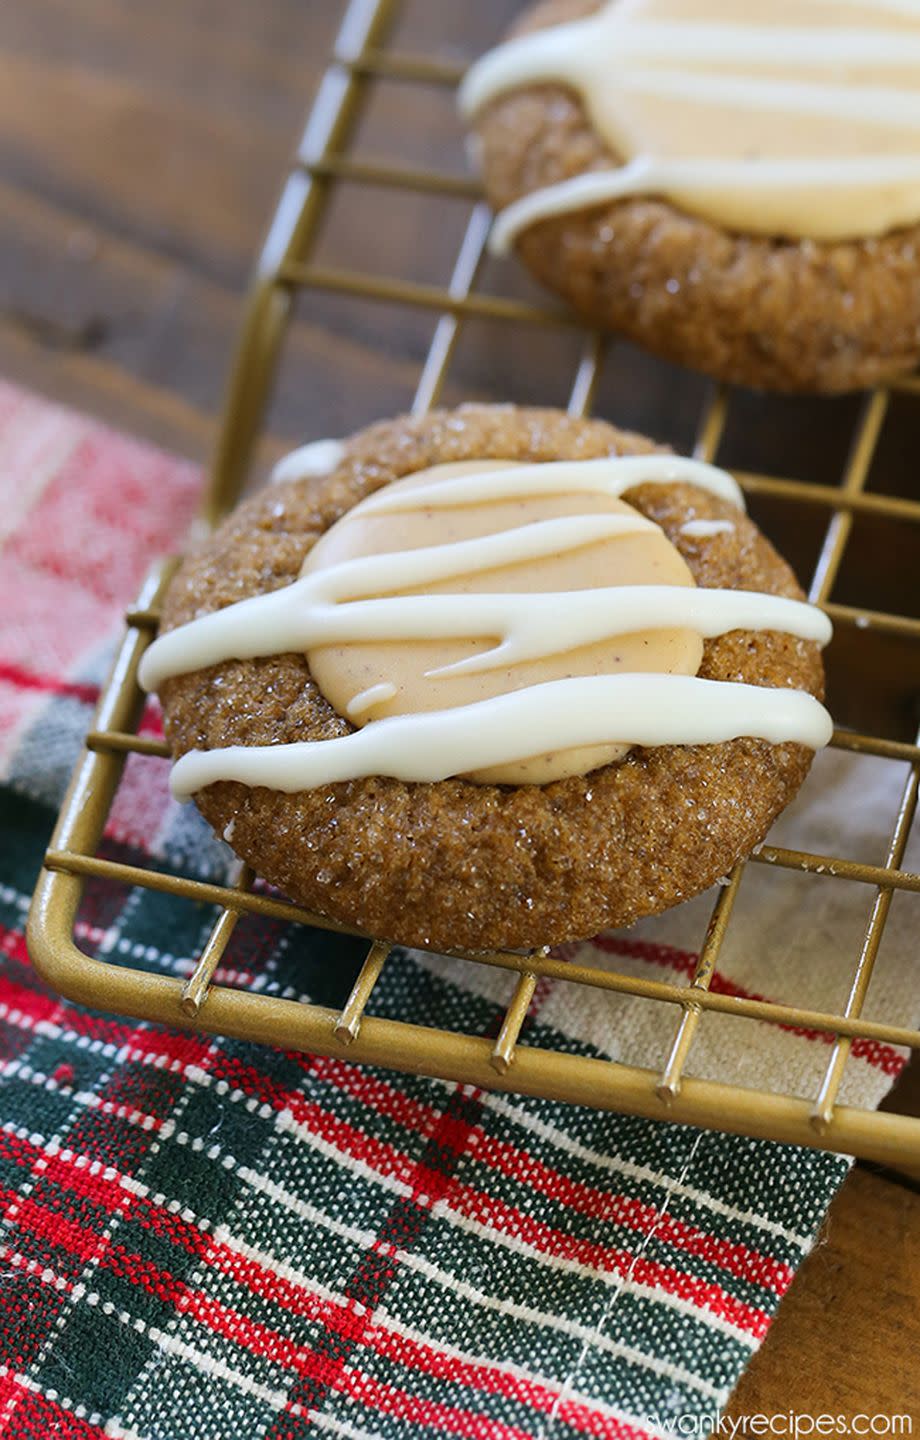 <p>Upgrade your usual <a href="https://www.countryliving.com/food-drinks/g3604/gingerbread-cookie-recipes/" rel="nofollow noopener" target="_blank" data-ylk="slk:gingerbread" class="link ">gingerbread</a> recipe with a melt-in-your-mouth spiced white chocolate filling.</p><p><strong>Get the recipe at <a href="http://www.swankyrecipes.com/gingerbread-thumbprint-cookies.html" rel="nofollow noopener" target="_blank" data-ylk="slk:Swanky Recipes" class="link ">Swanky Recipes</a>.</strong> </p>